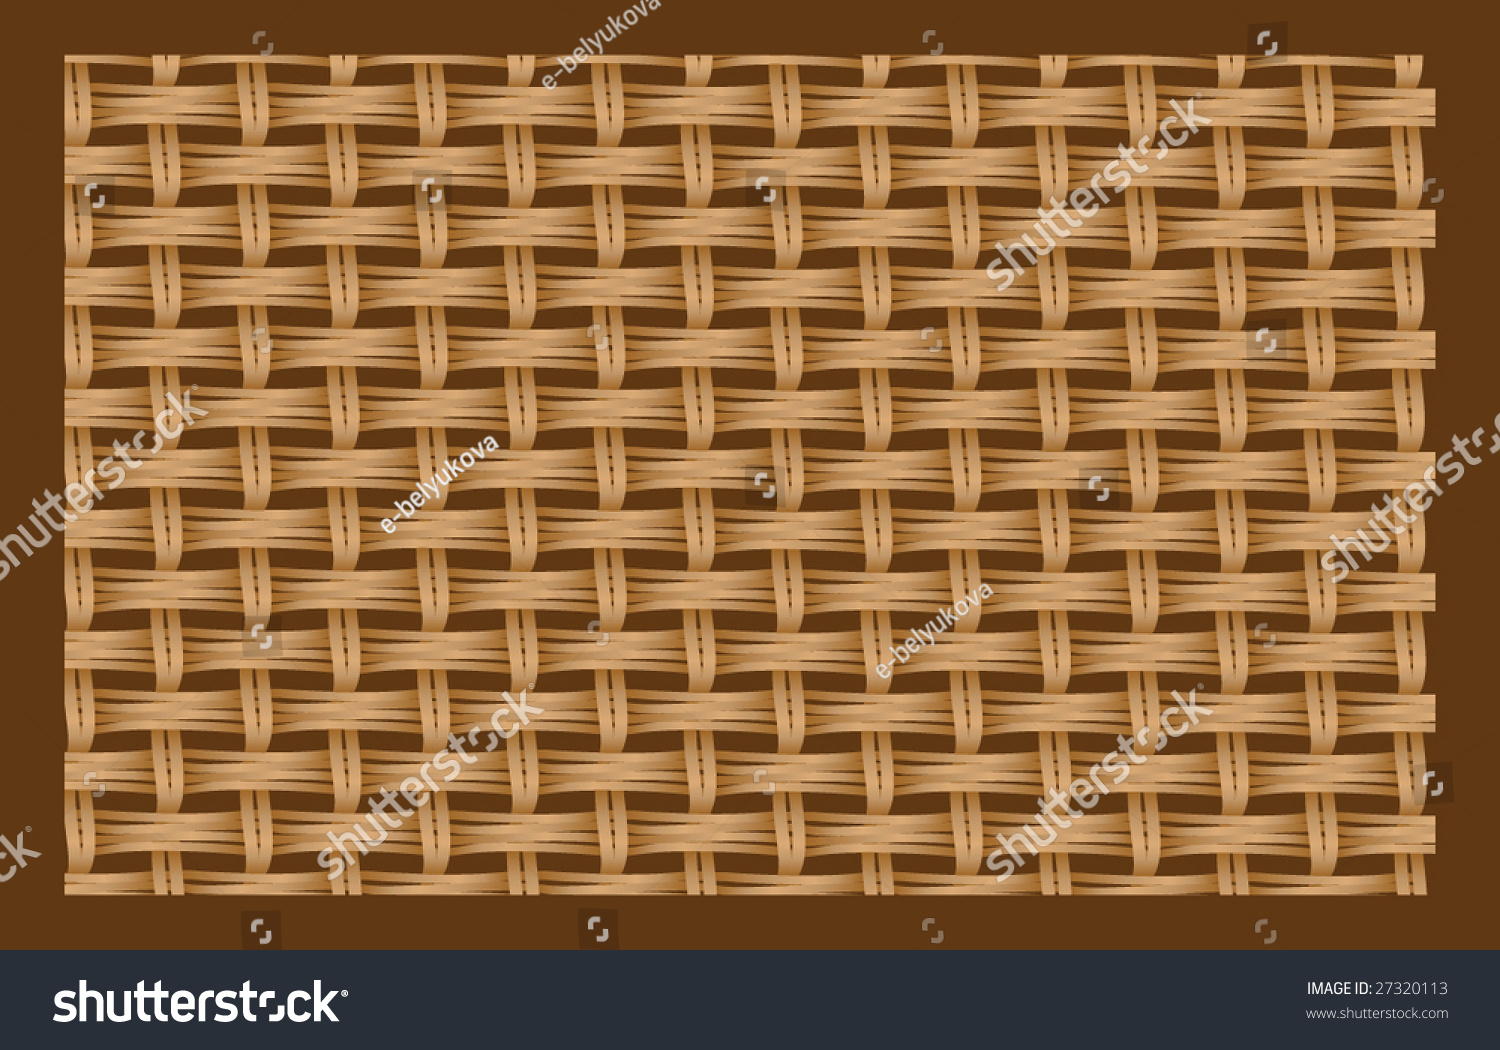 SVG of Vector seamless texture of intertwined strings. svg